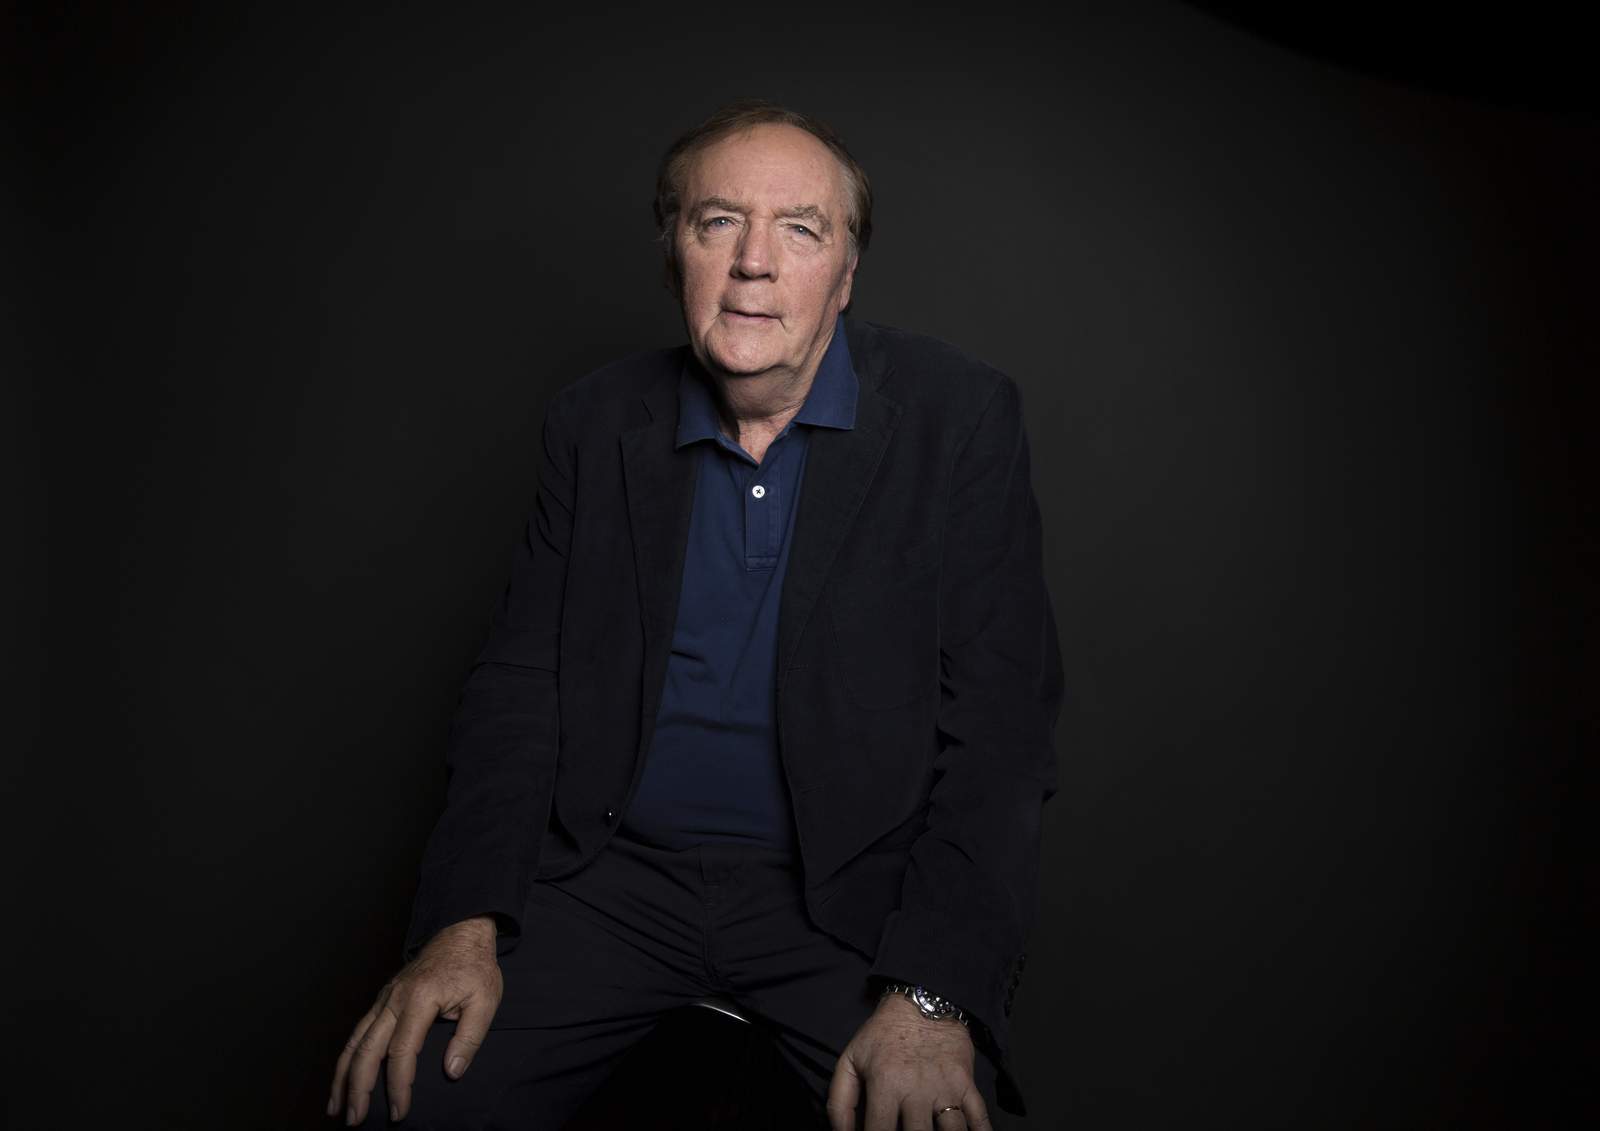 James Patterson awards $500 grants to thousands of teachers